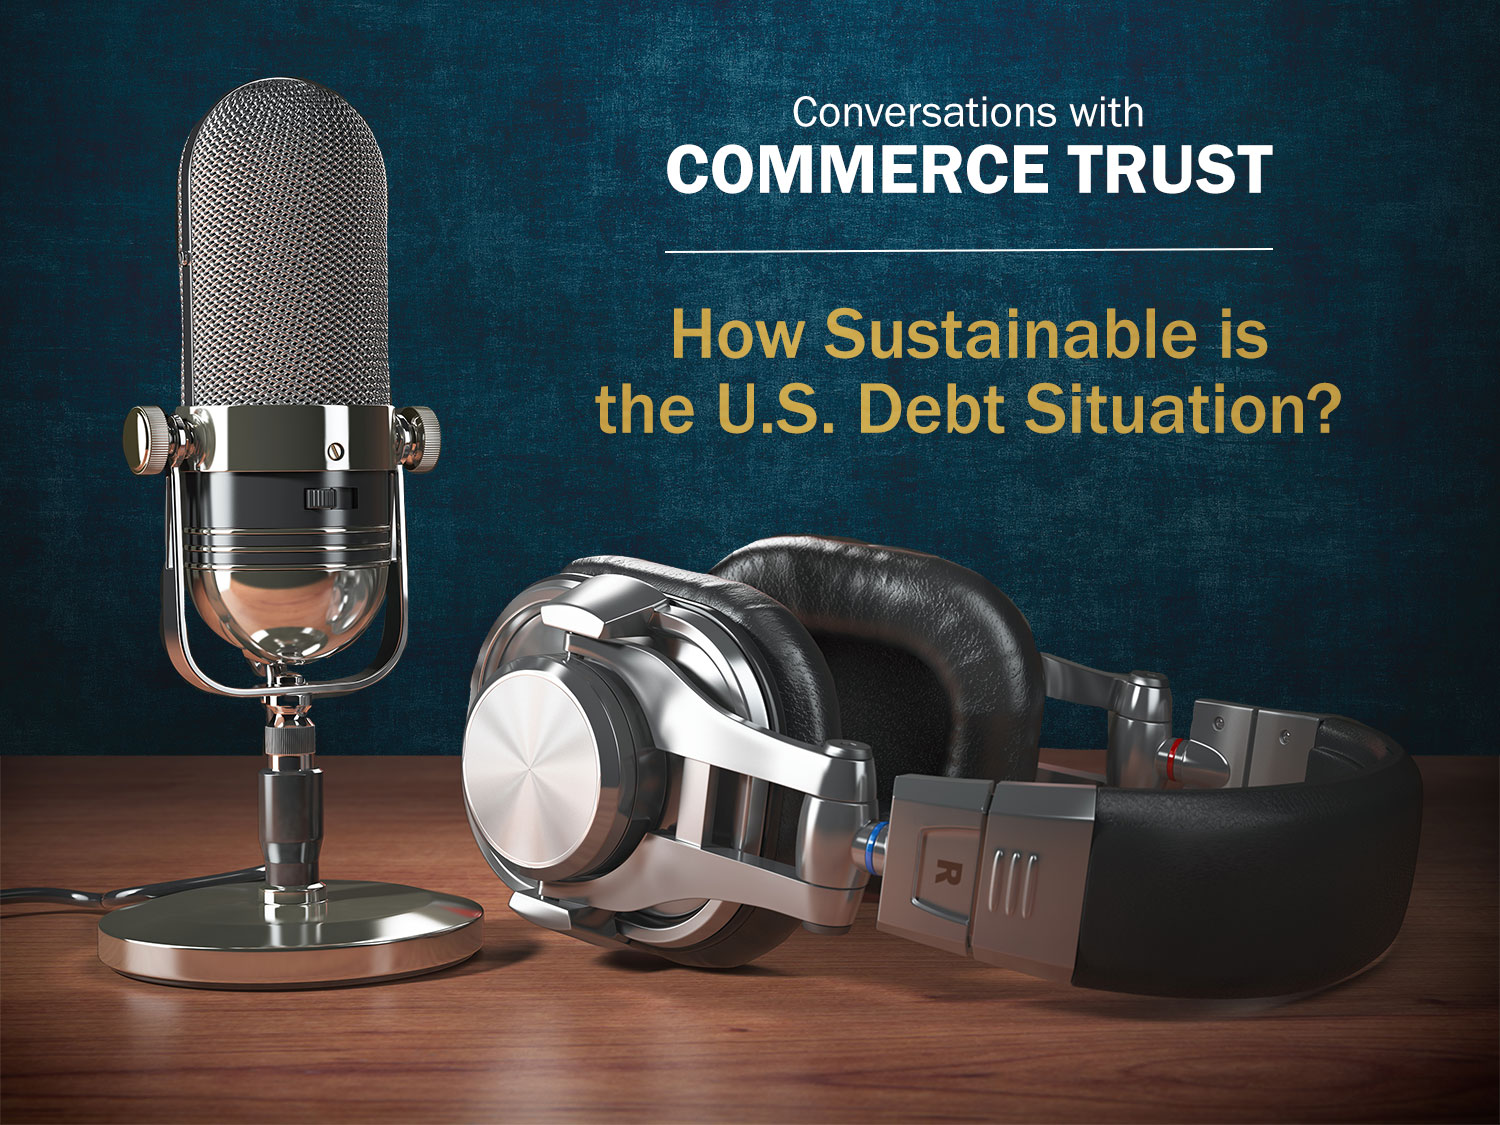 How Sustainable is the U.S. Debt Situation Podcast